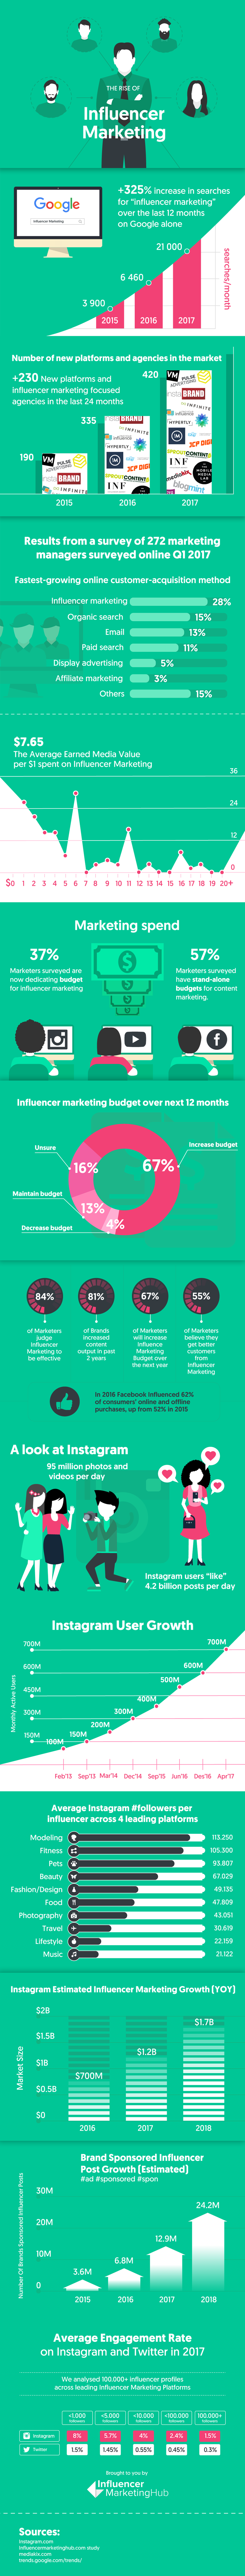 the rise of influencer marketing - infographic